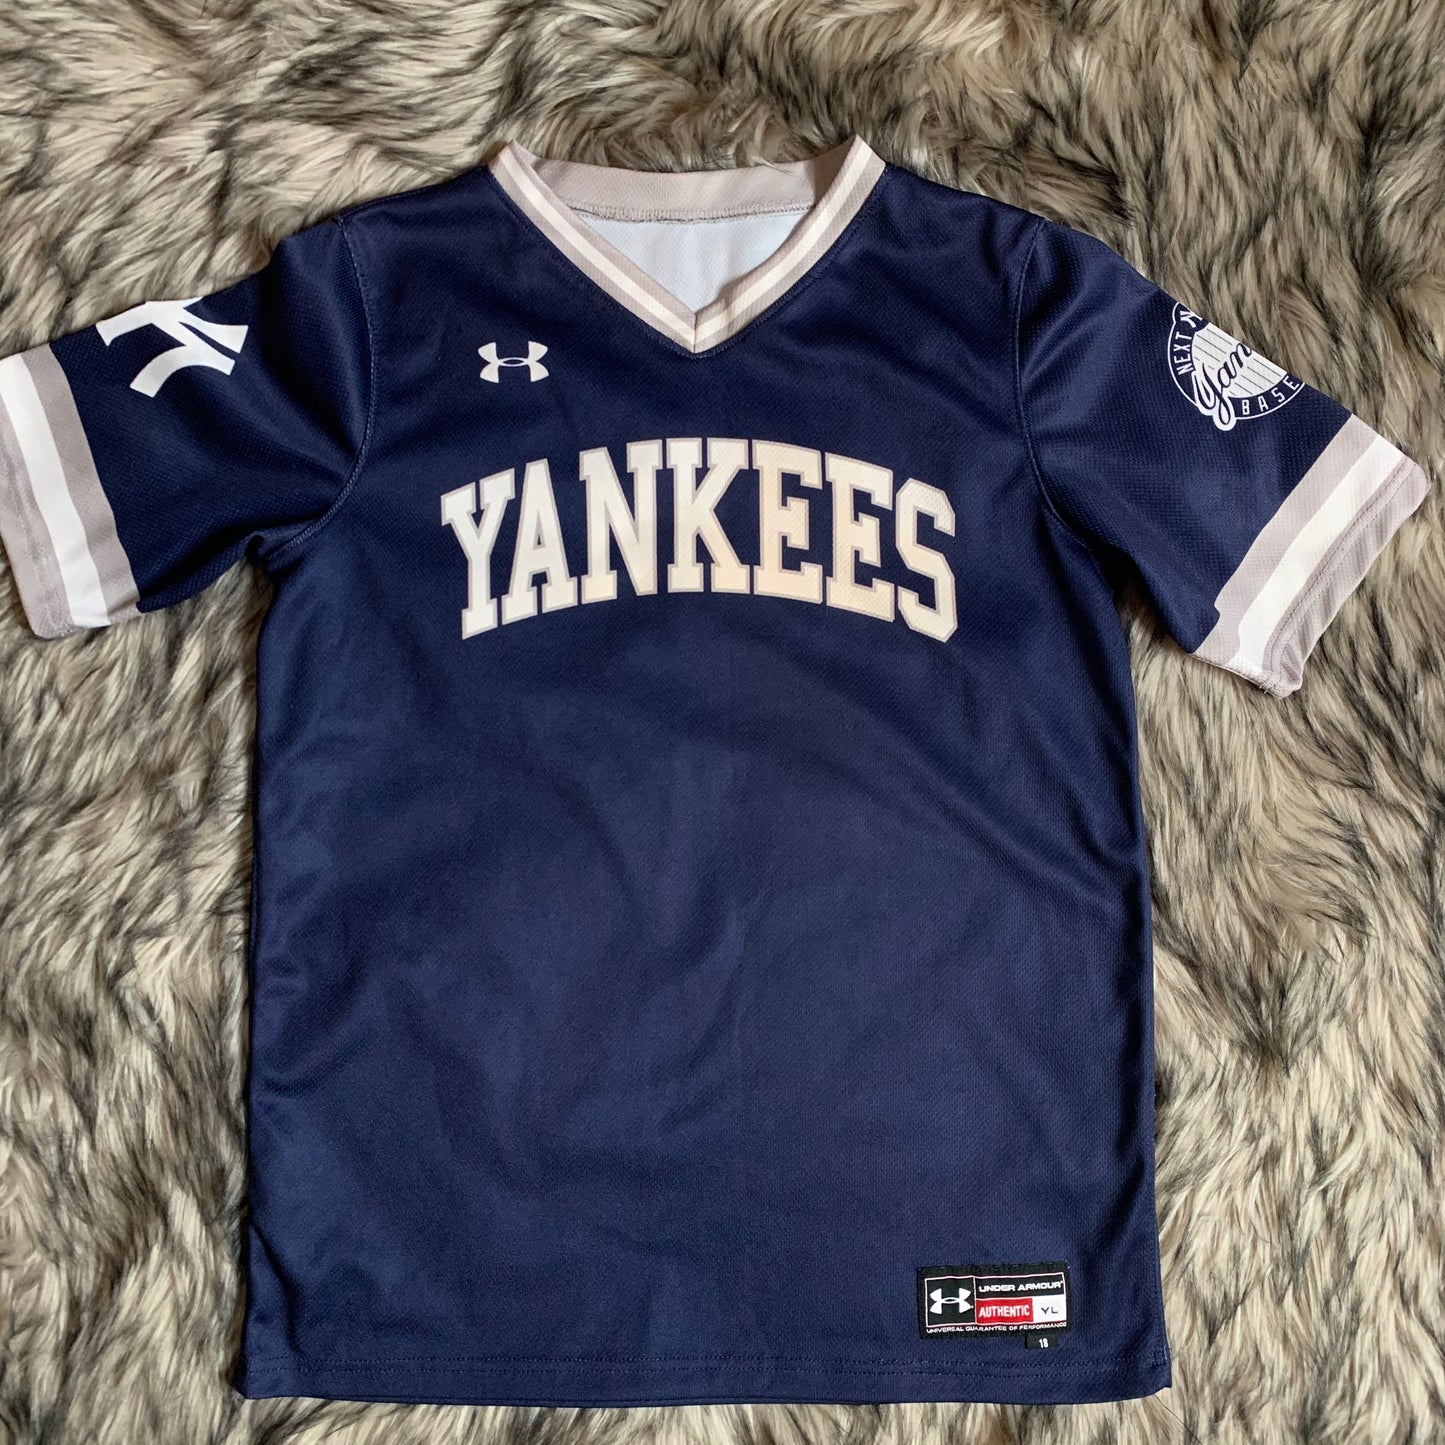 Under Armour youth New York Yankees baseball Jersey